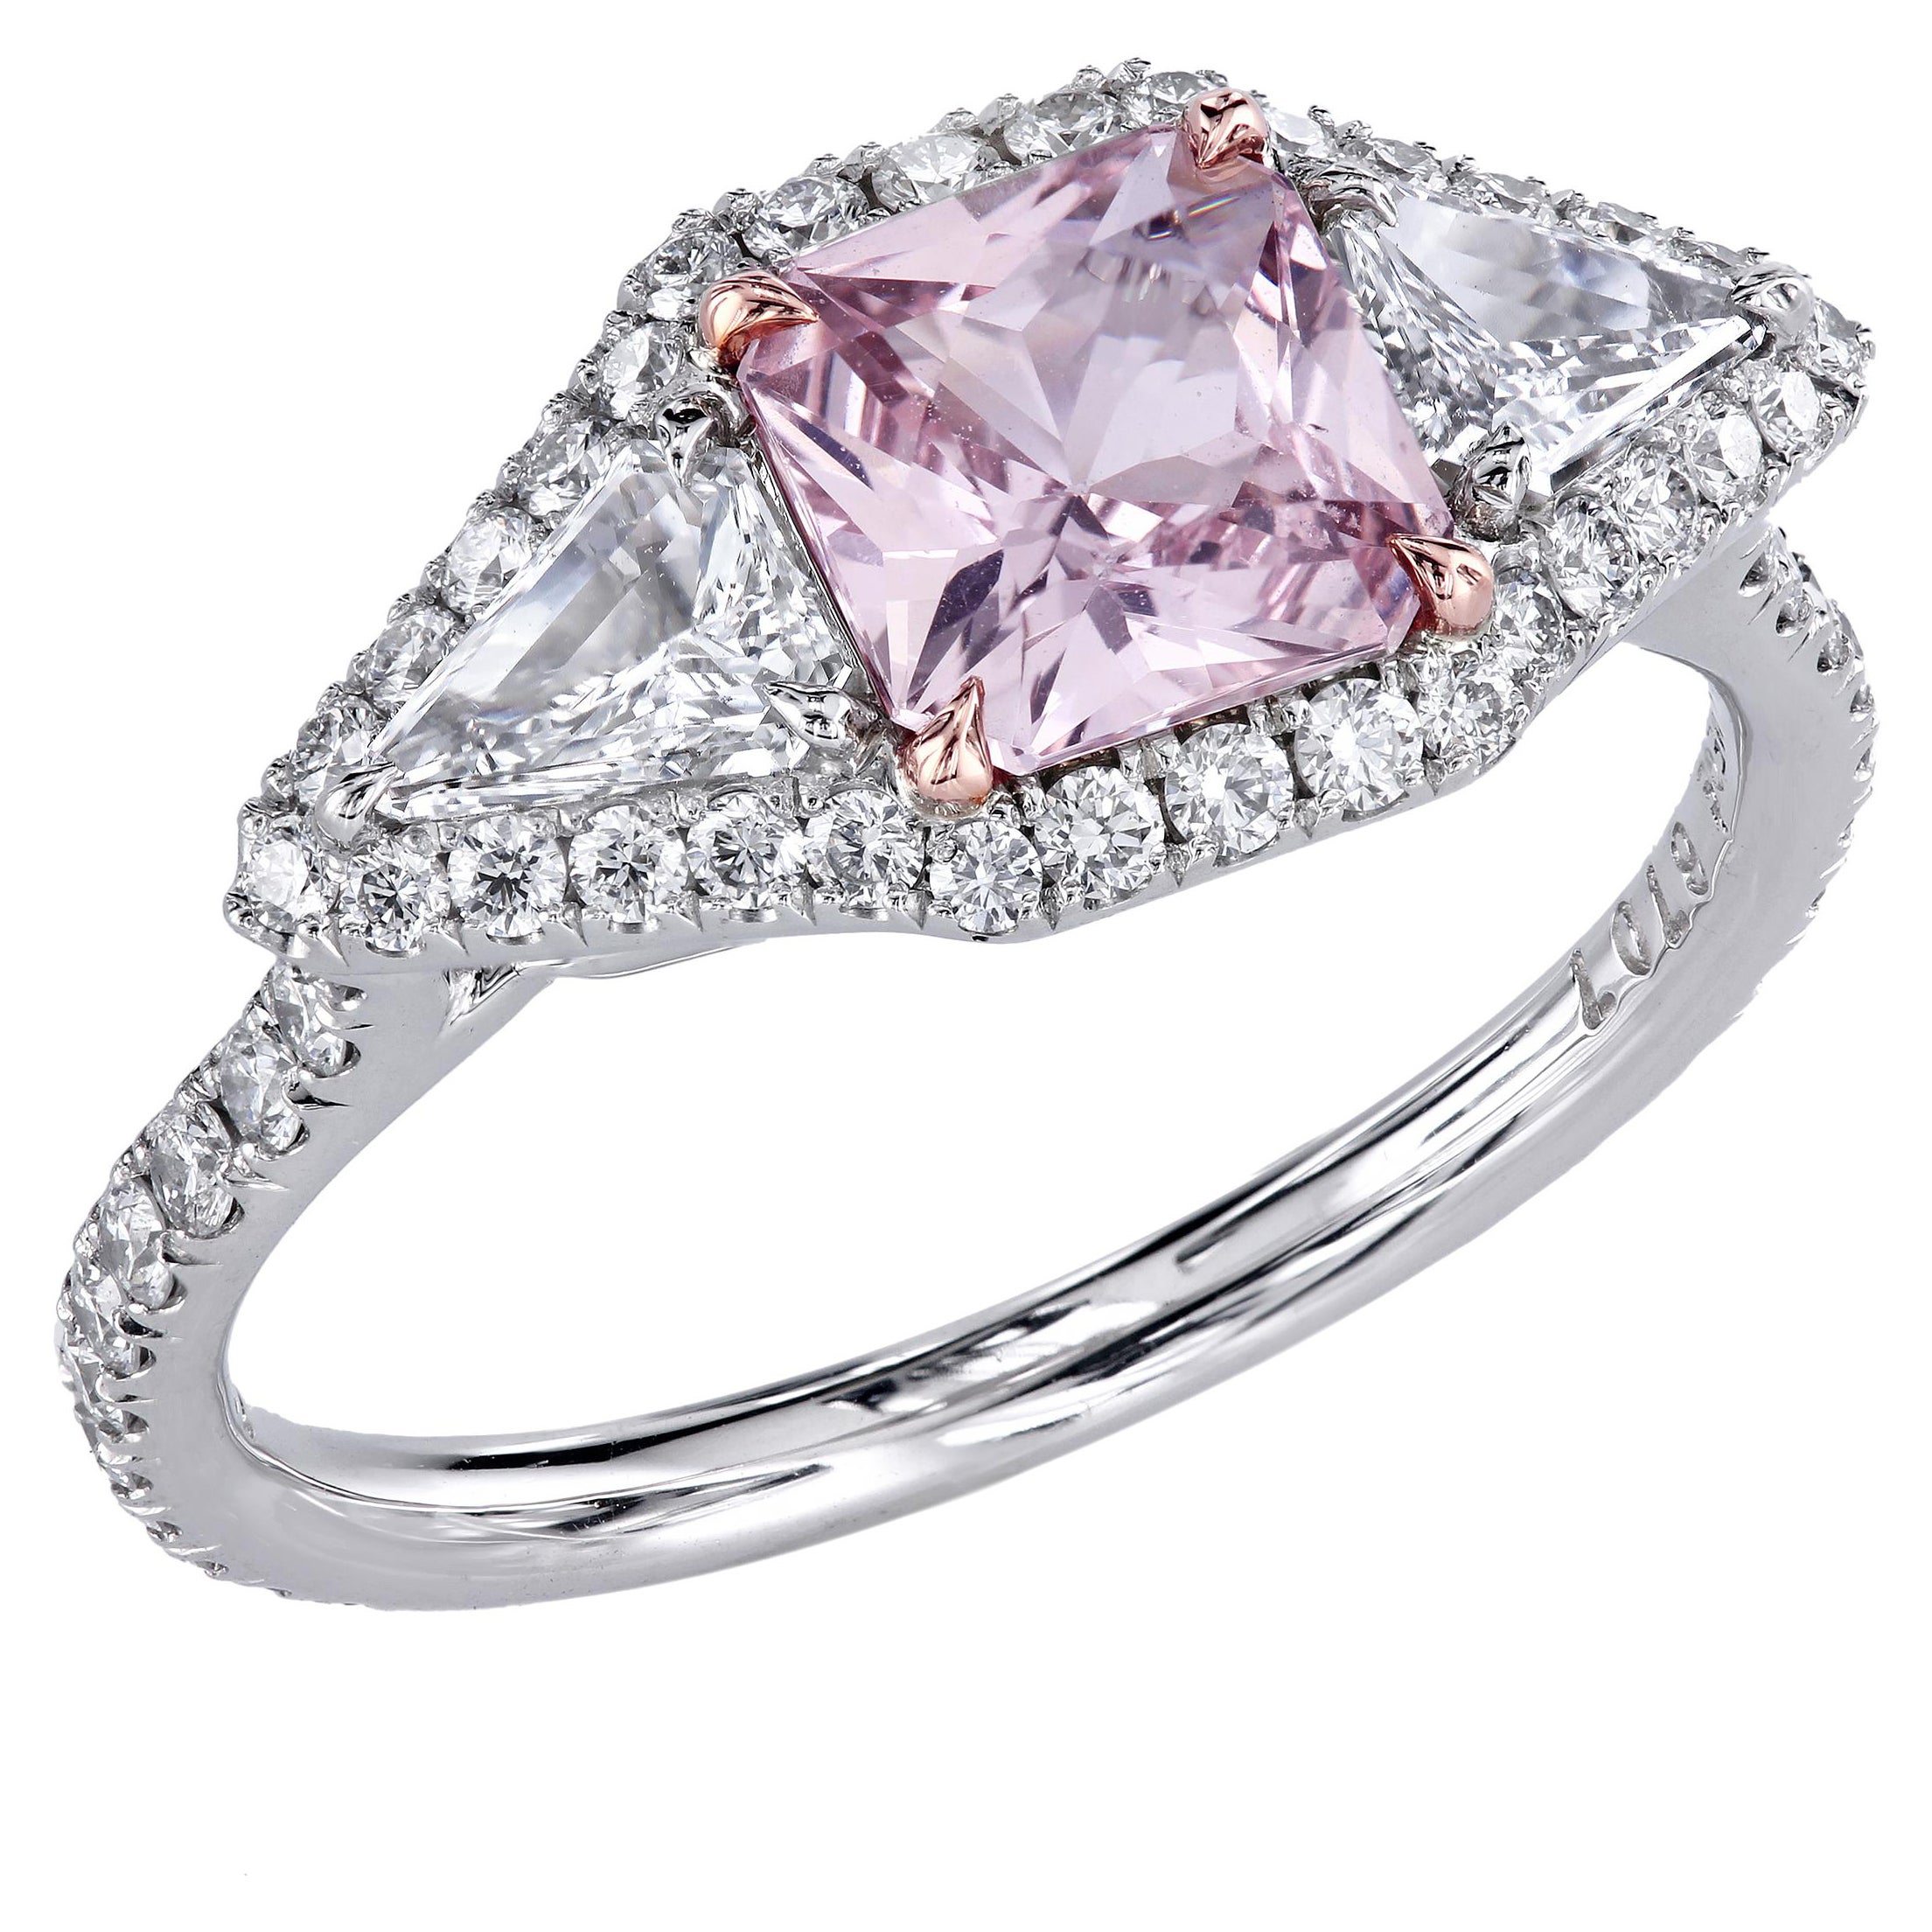 Leon Mege Montpassier Style Platinum Diamond Ring with a Natural Pink Sapphire For Sale